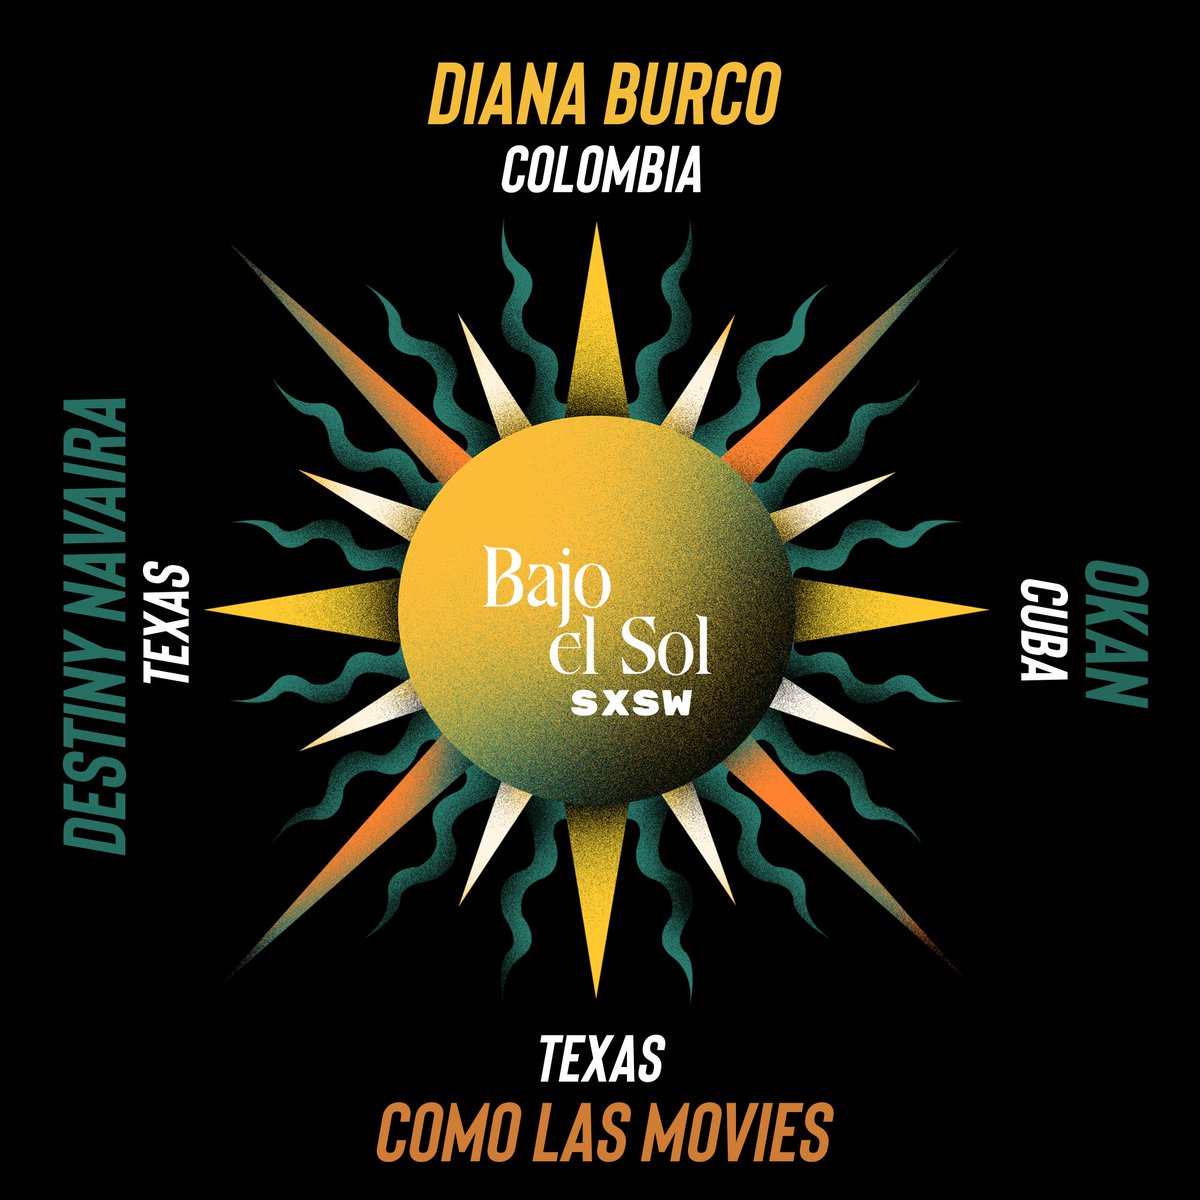 If you like Latin music tune into my new Friday program #bajoelsol on @SunRadioTX 11-3PM - this week featuring artists in town next week for @sxsw from Cuba (Okan), Colombia @dianaburco & two Lone Stars you should know about @comolasmovies @destinynavaira 🤘🏽🎶🔥